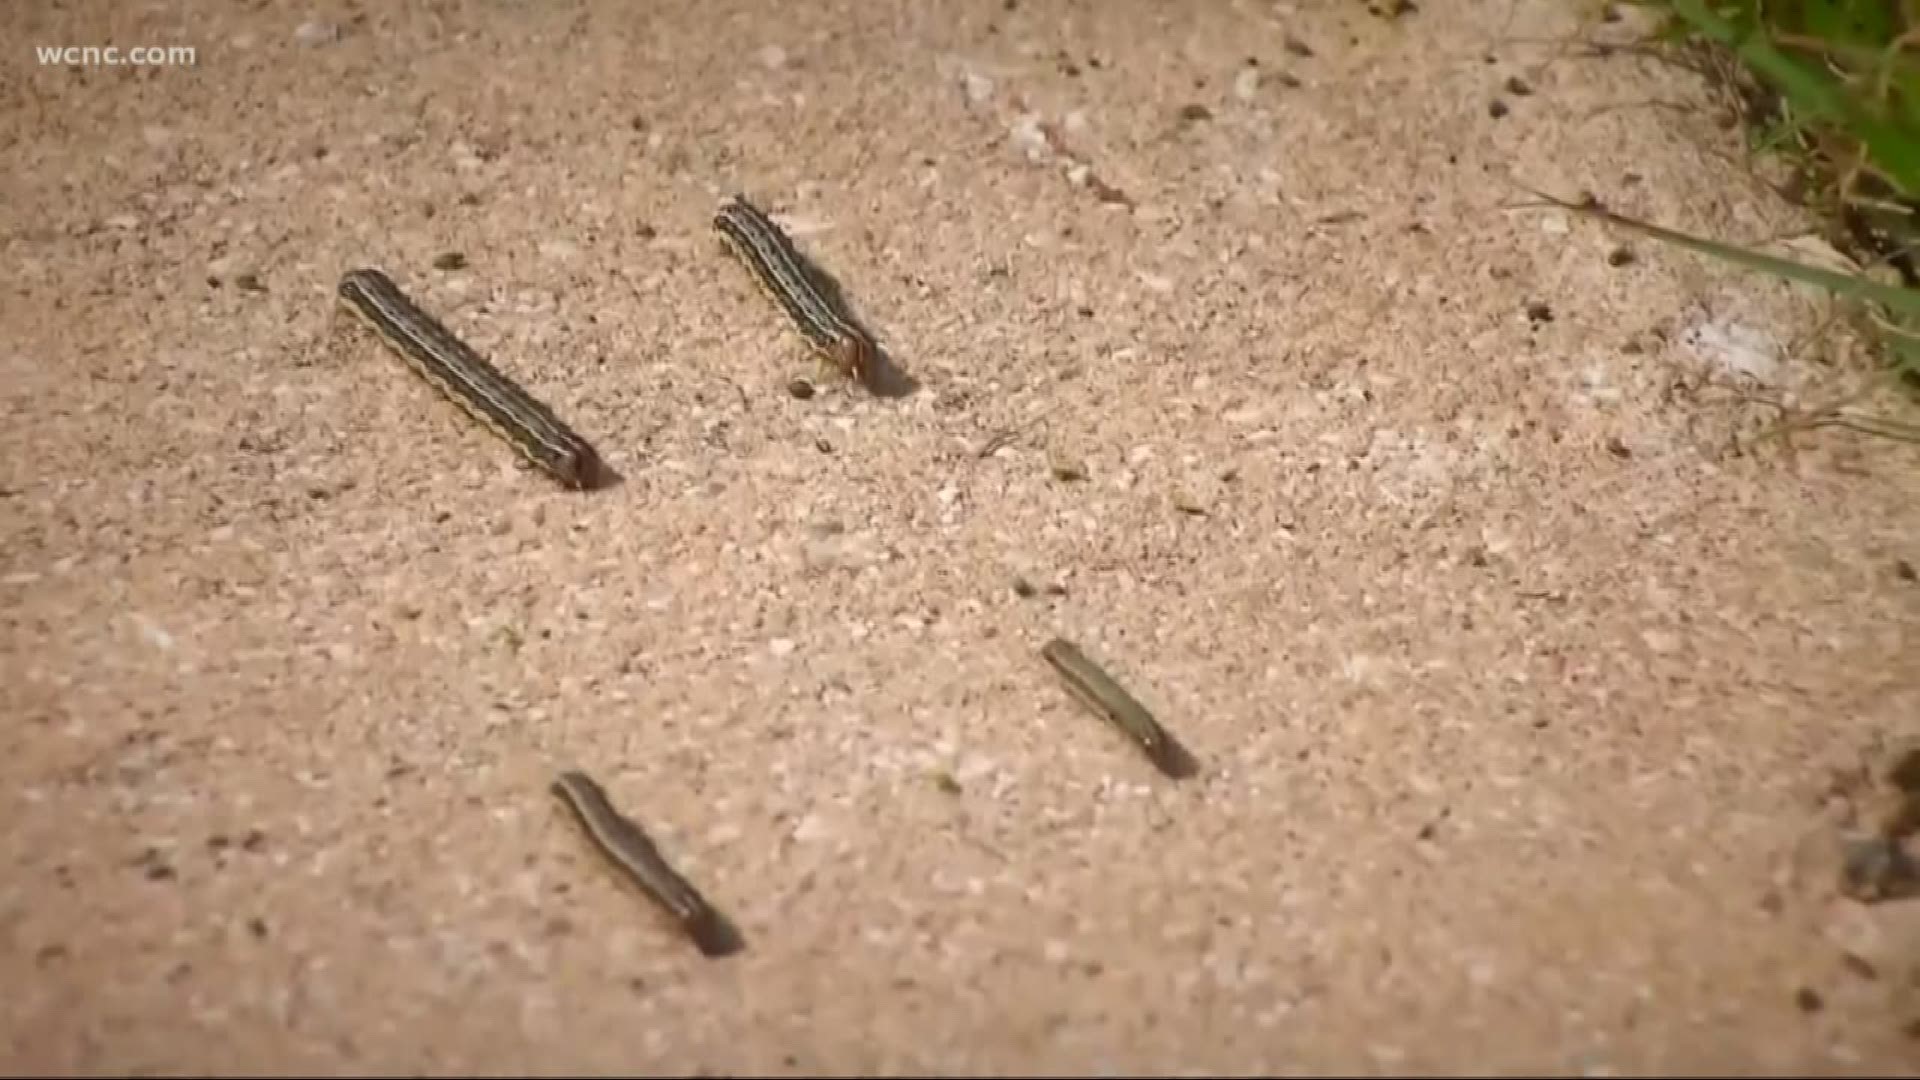 Fall army worms the size of a caterpillar could cause thousands of dollars worth of damage.